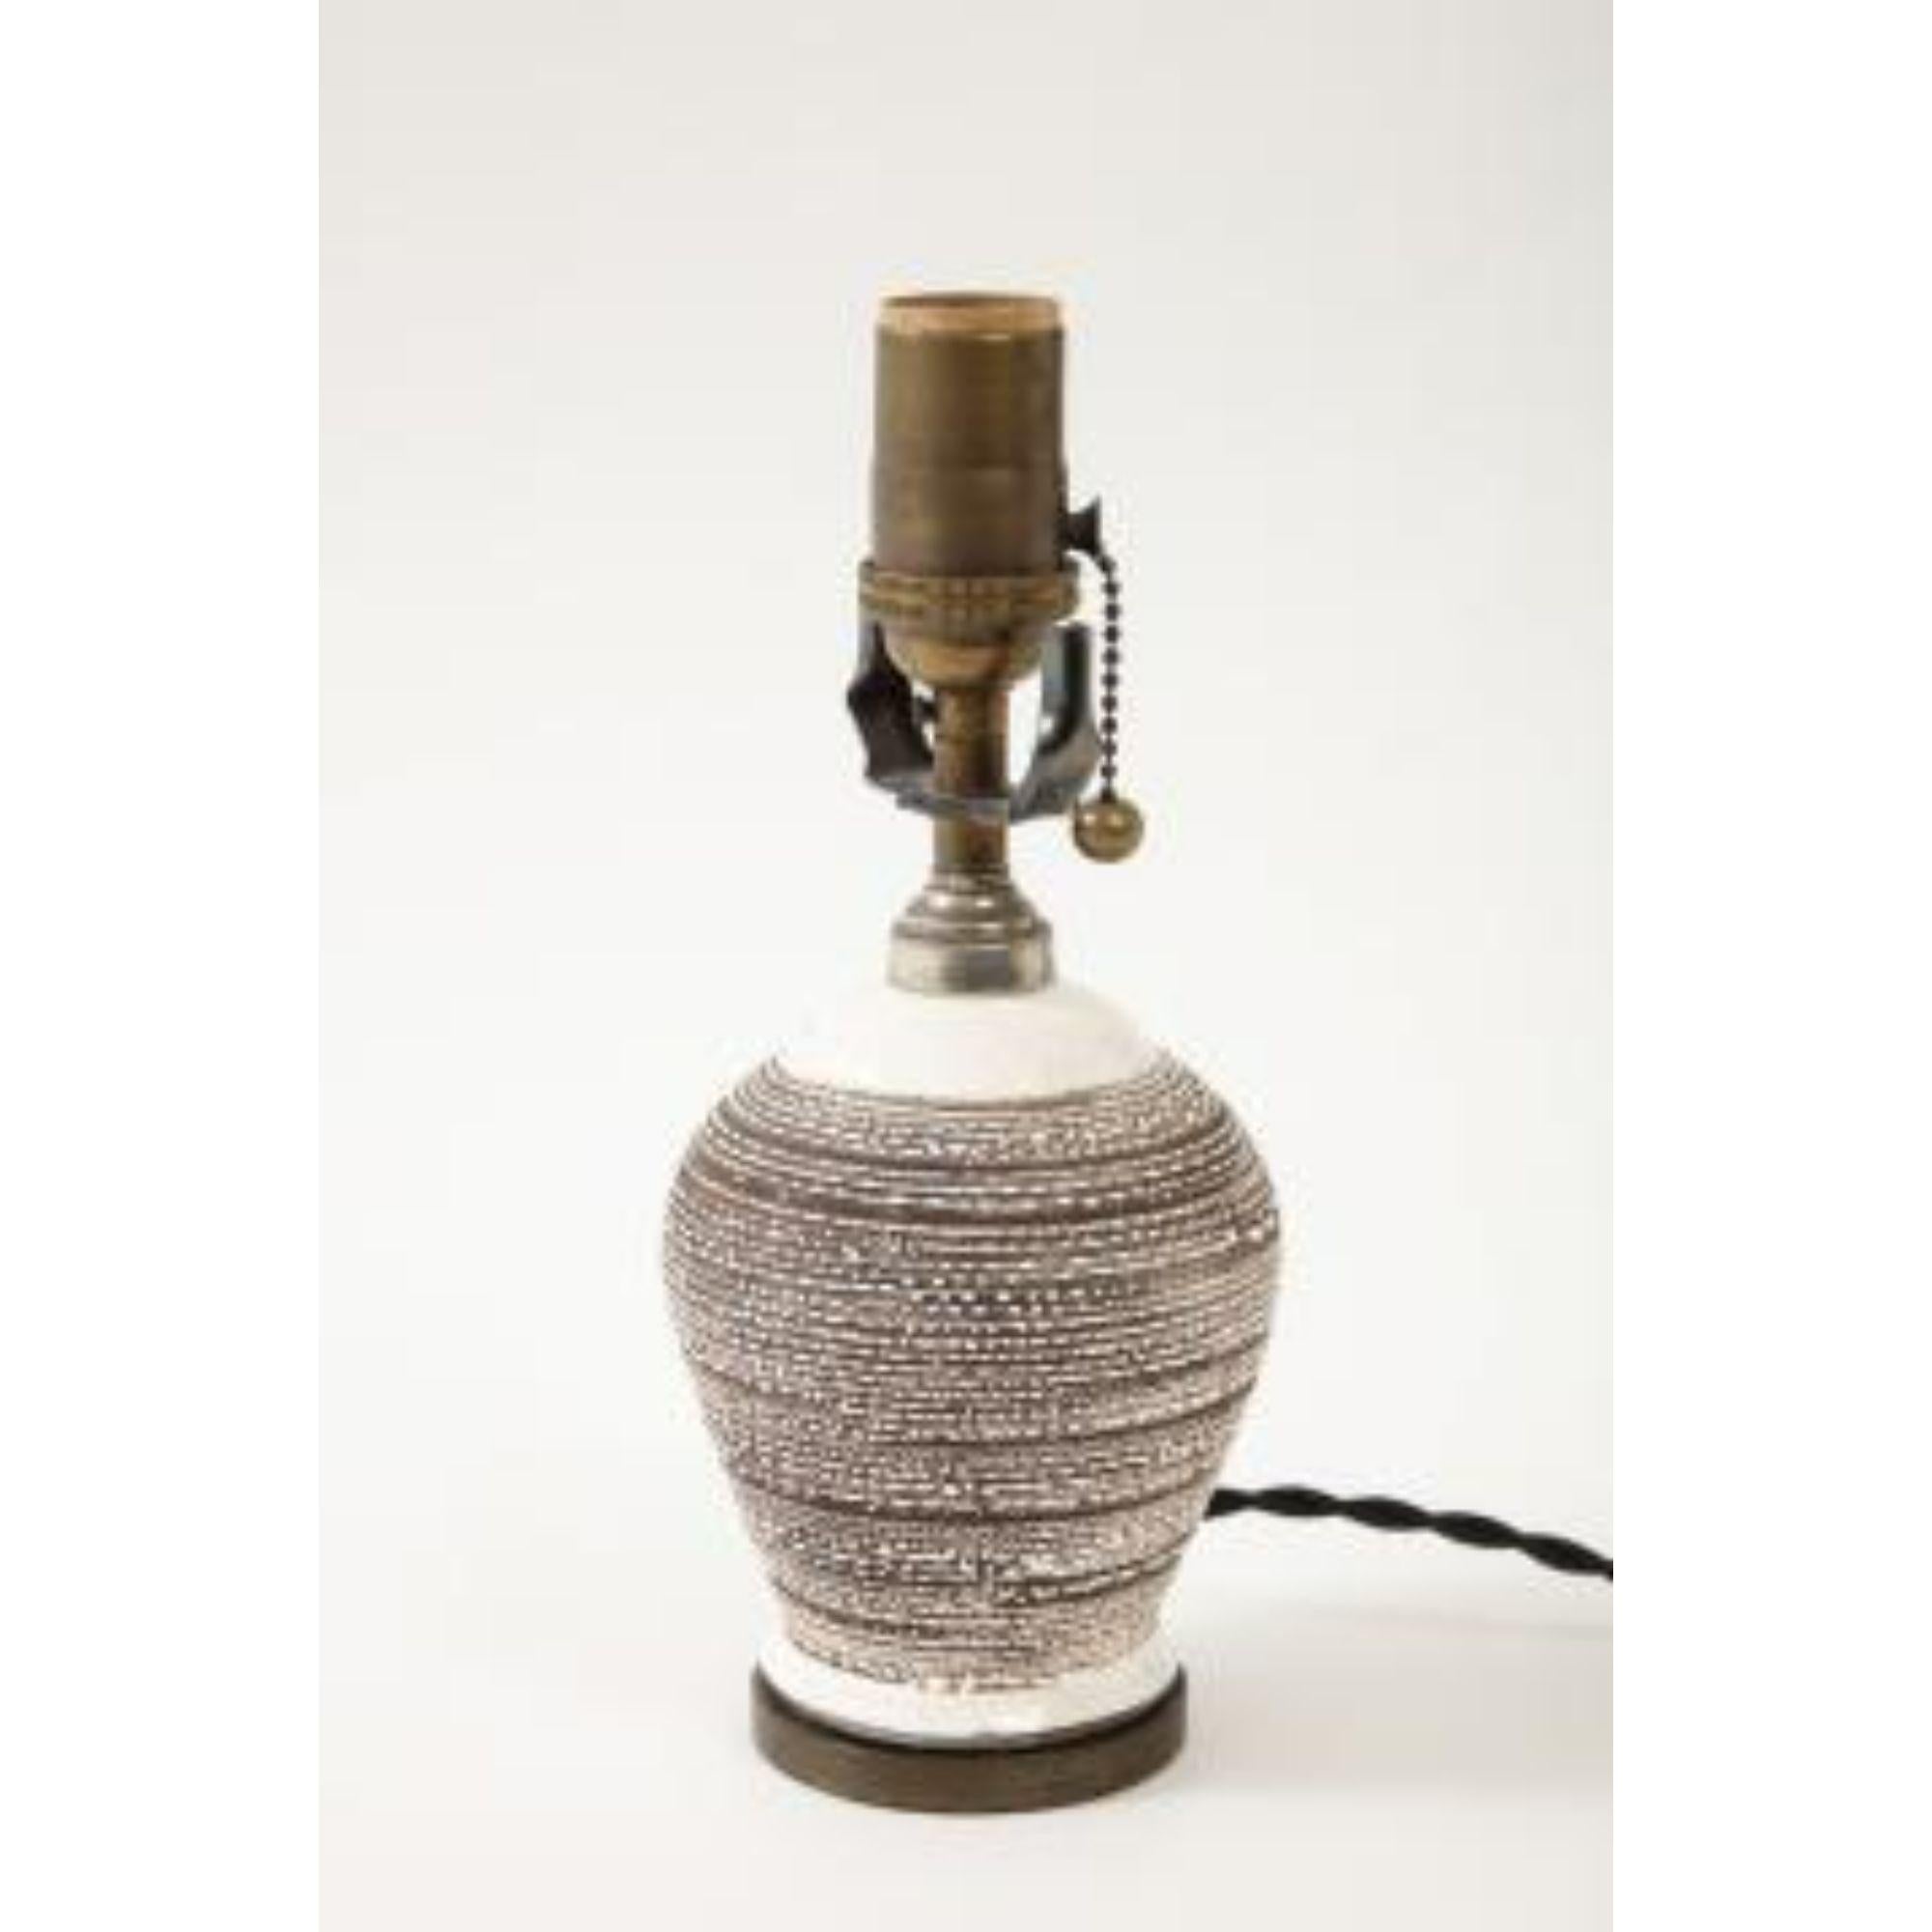 Small Brown and White Textured Table Lamp, circa 20th century

This lamp has been newly rewired, mounted onto a custom bronze base, and outfitted with a black twisted silk cord.

